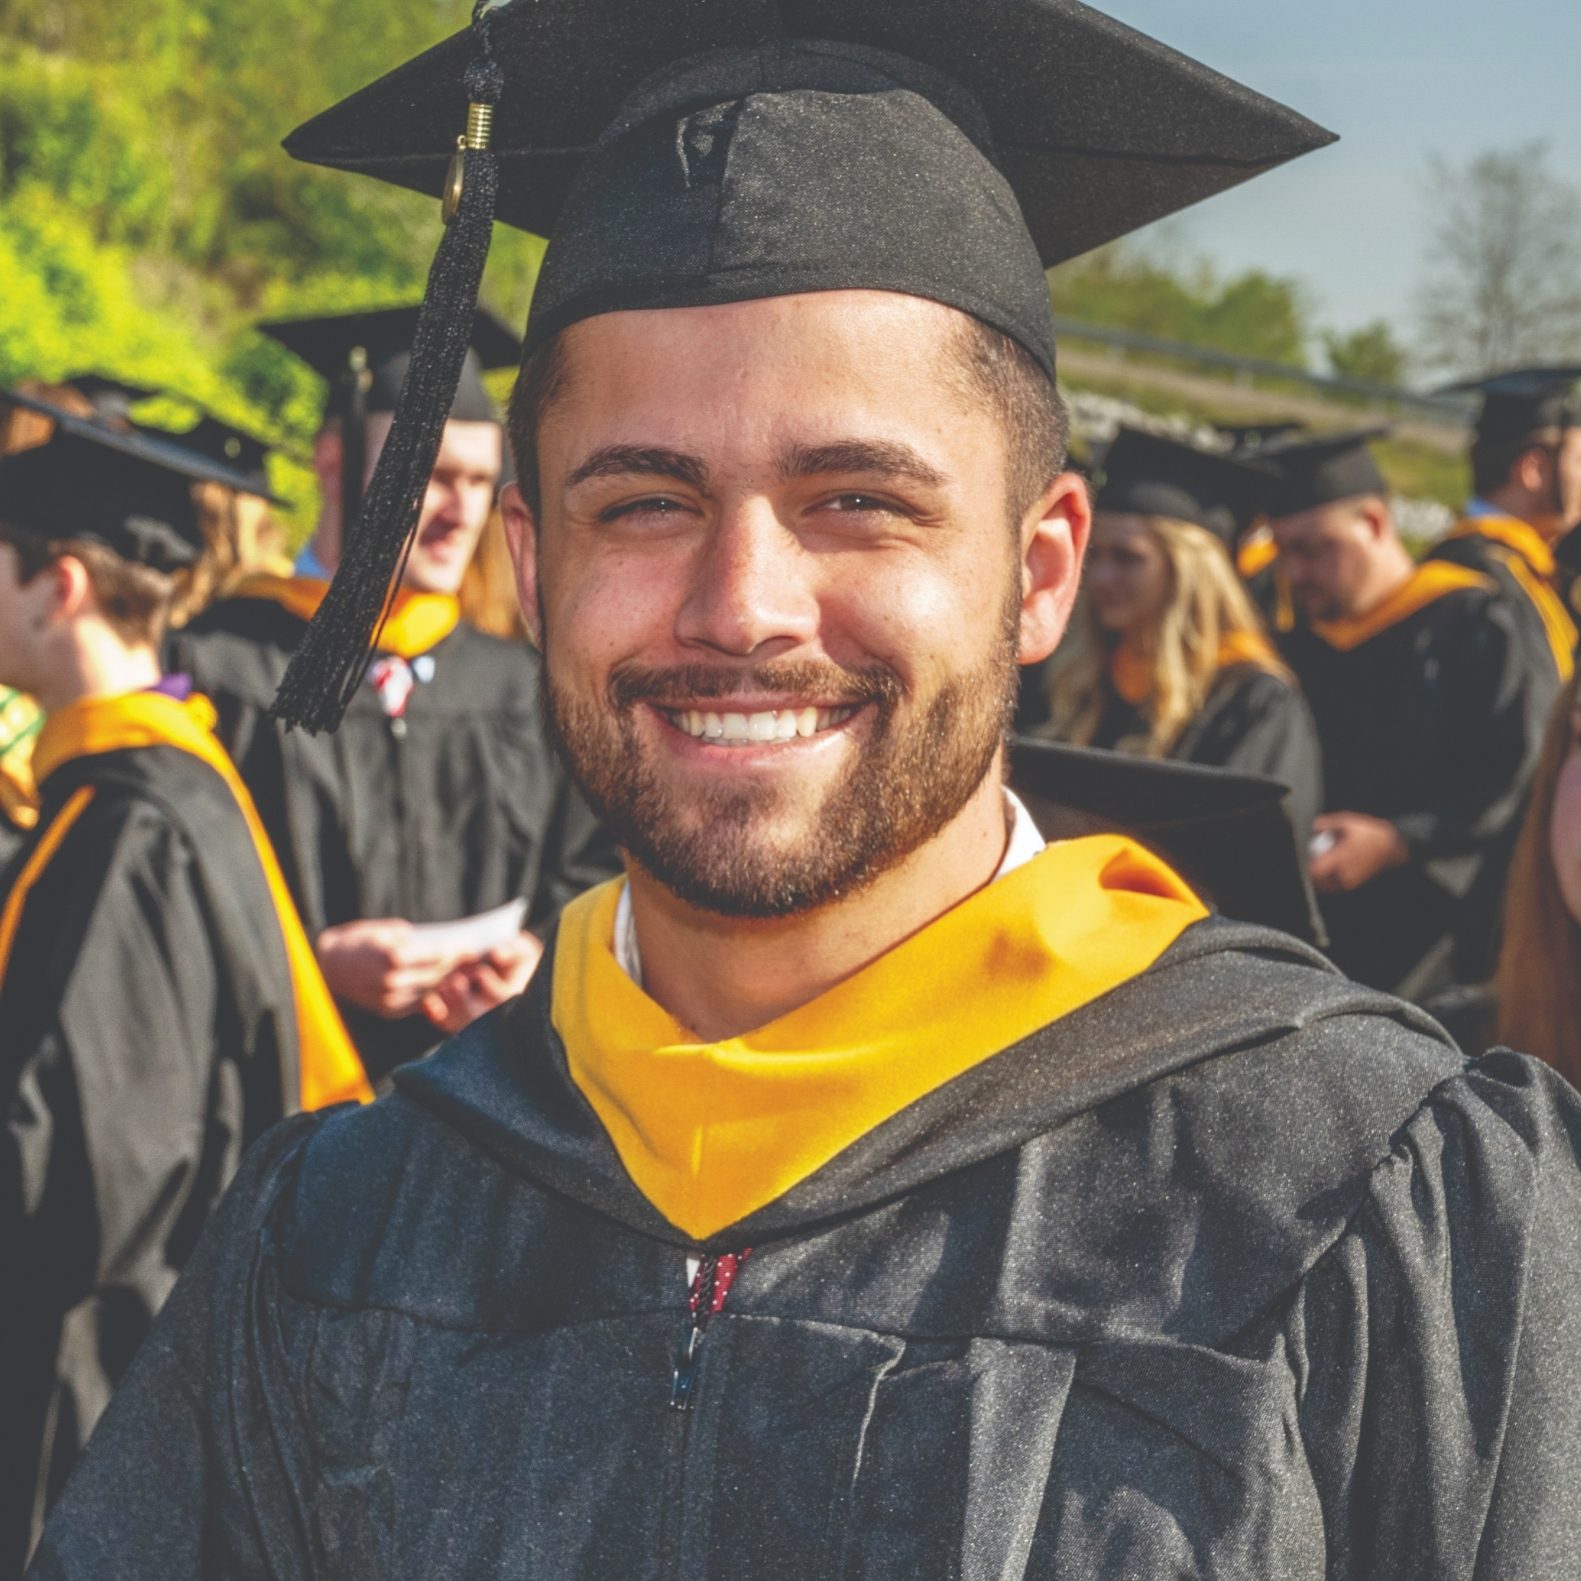 Student smiling during graduation ceremony